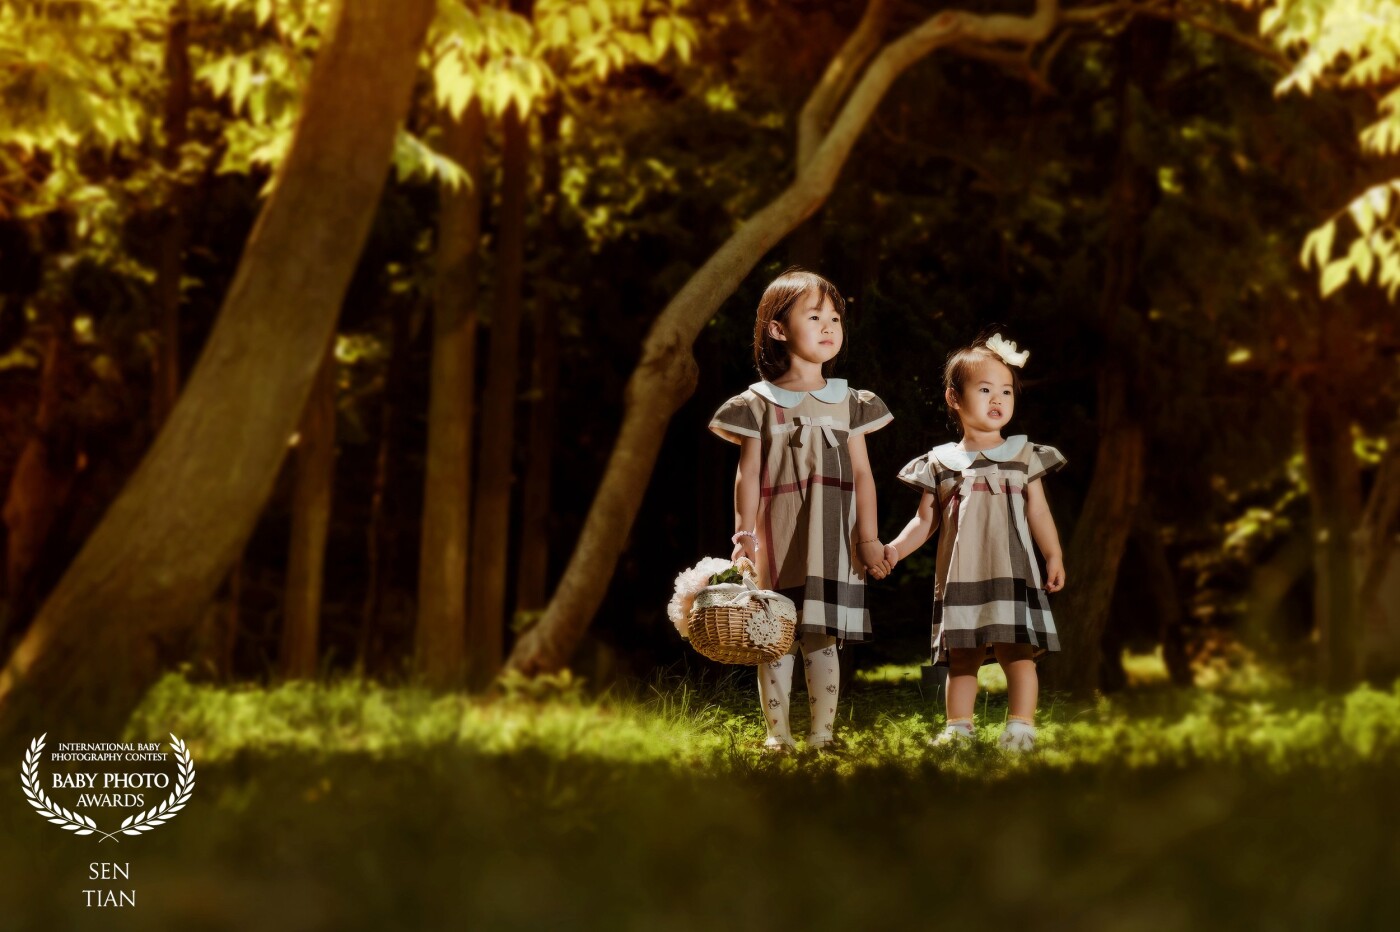 《Plaid skirt》<br />
This is a pair of close sisters, one in kindergarten and one who can just walk. The two children are wearing plaid skirts and holding hands everywhere. When they stand in the sun and their hair is illuminated, we think this is a wonderful picture.